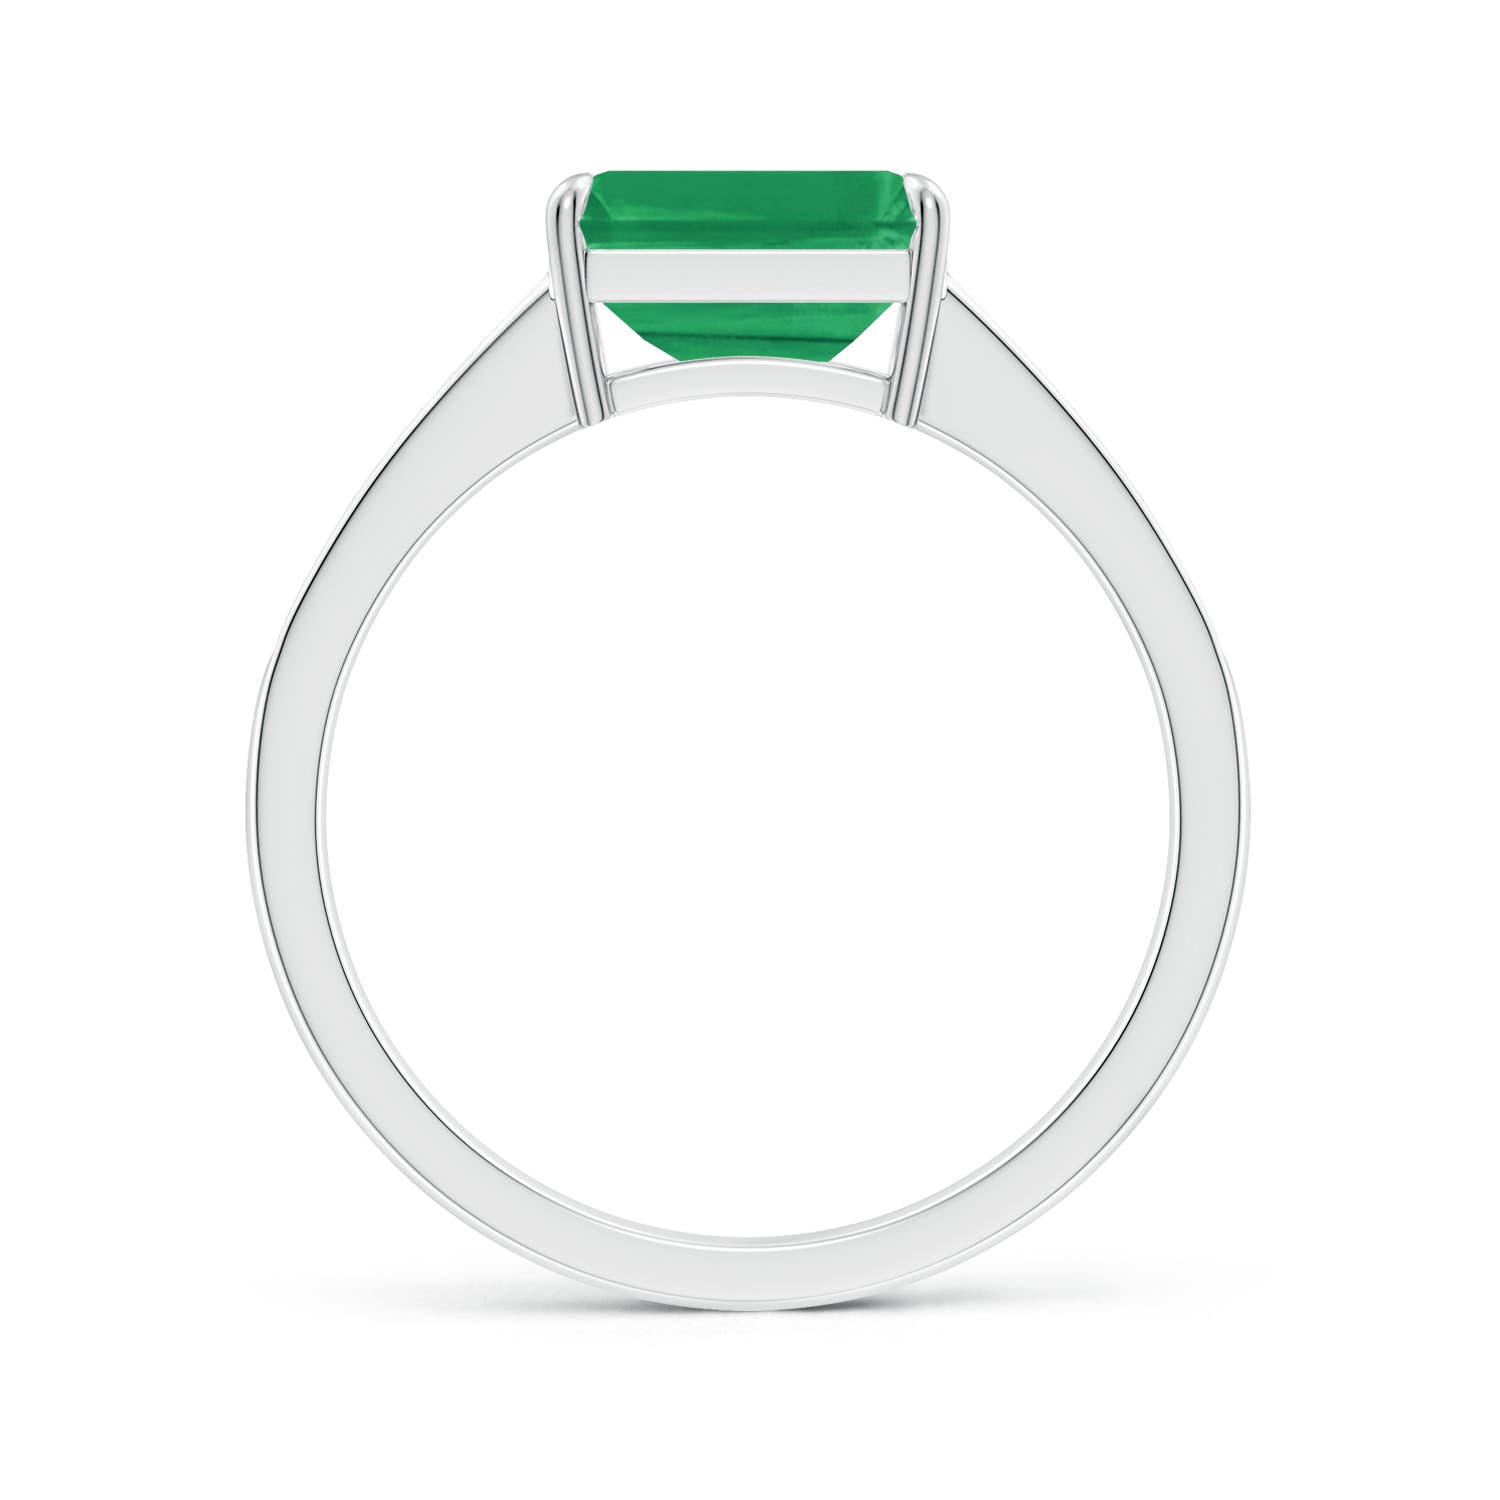 A - Emerald / 1.82 CT / 14 KT White Gold